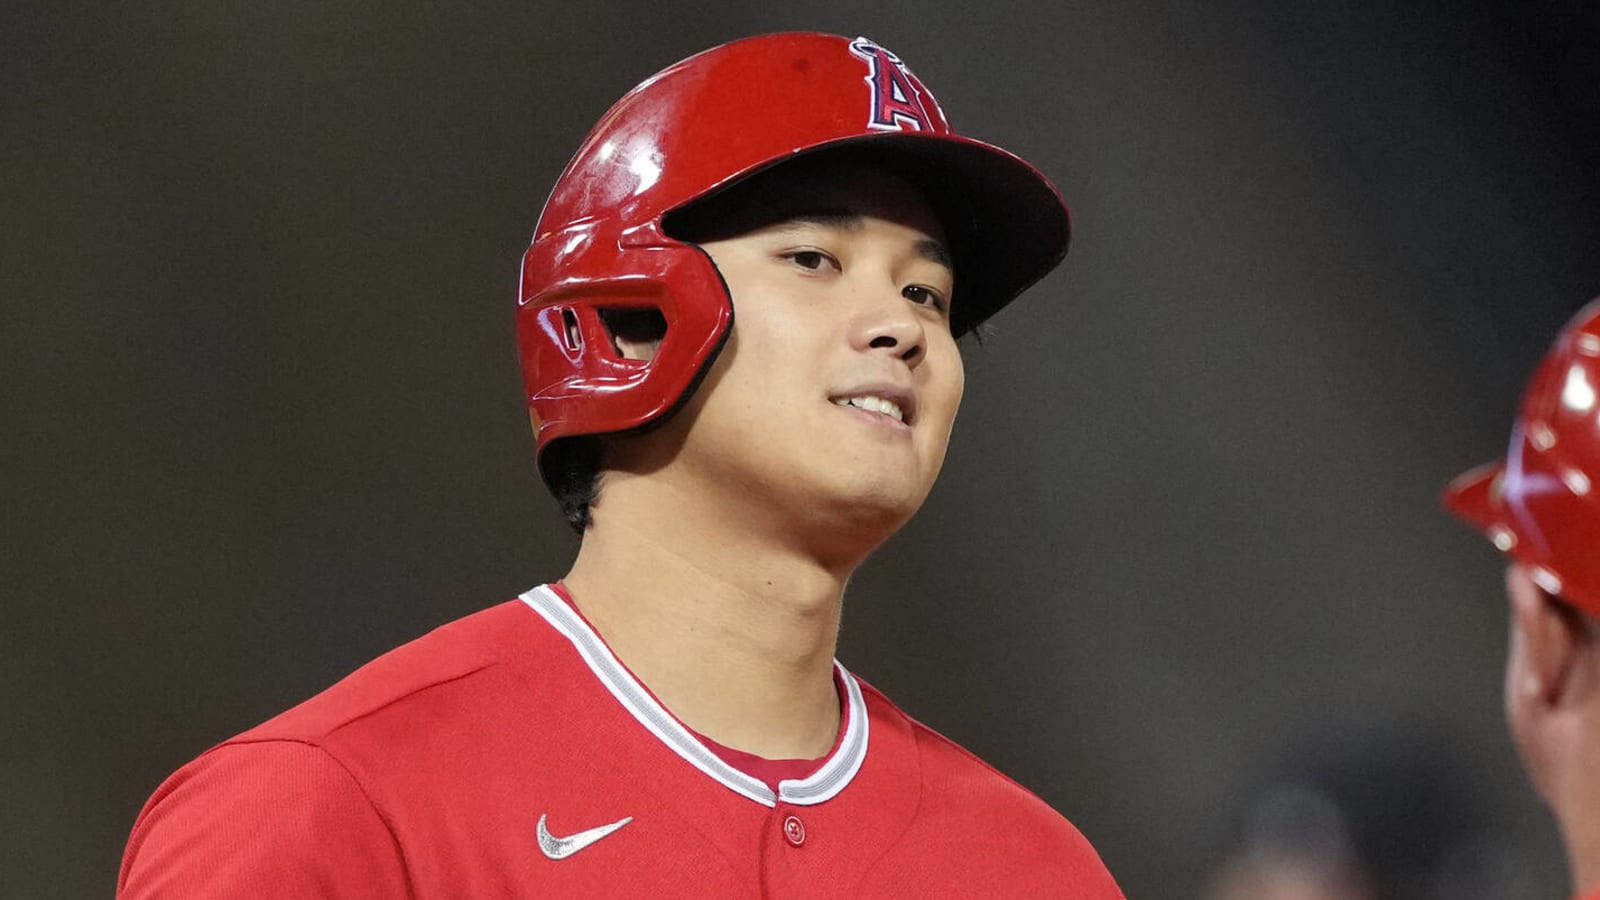 Ohtani ranked No. 1 player for second consecutive year